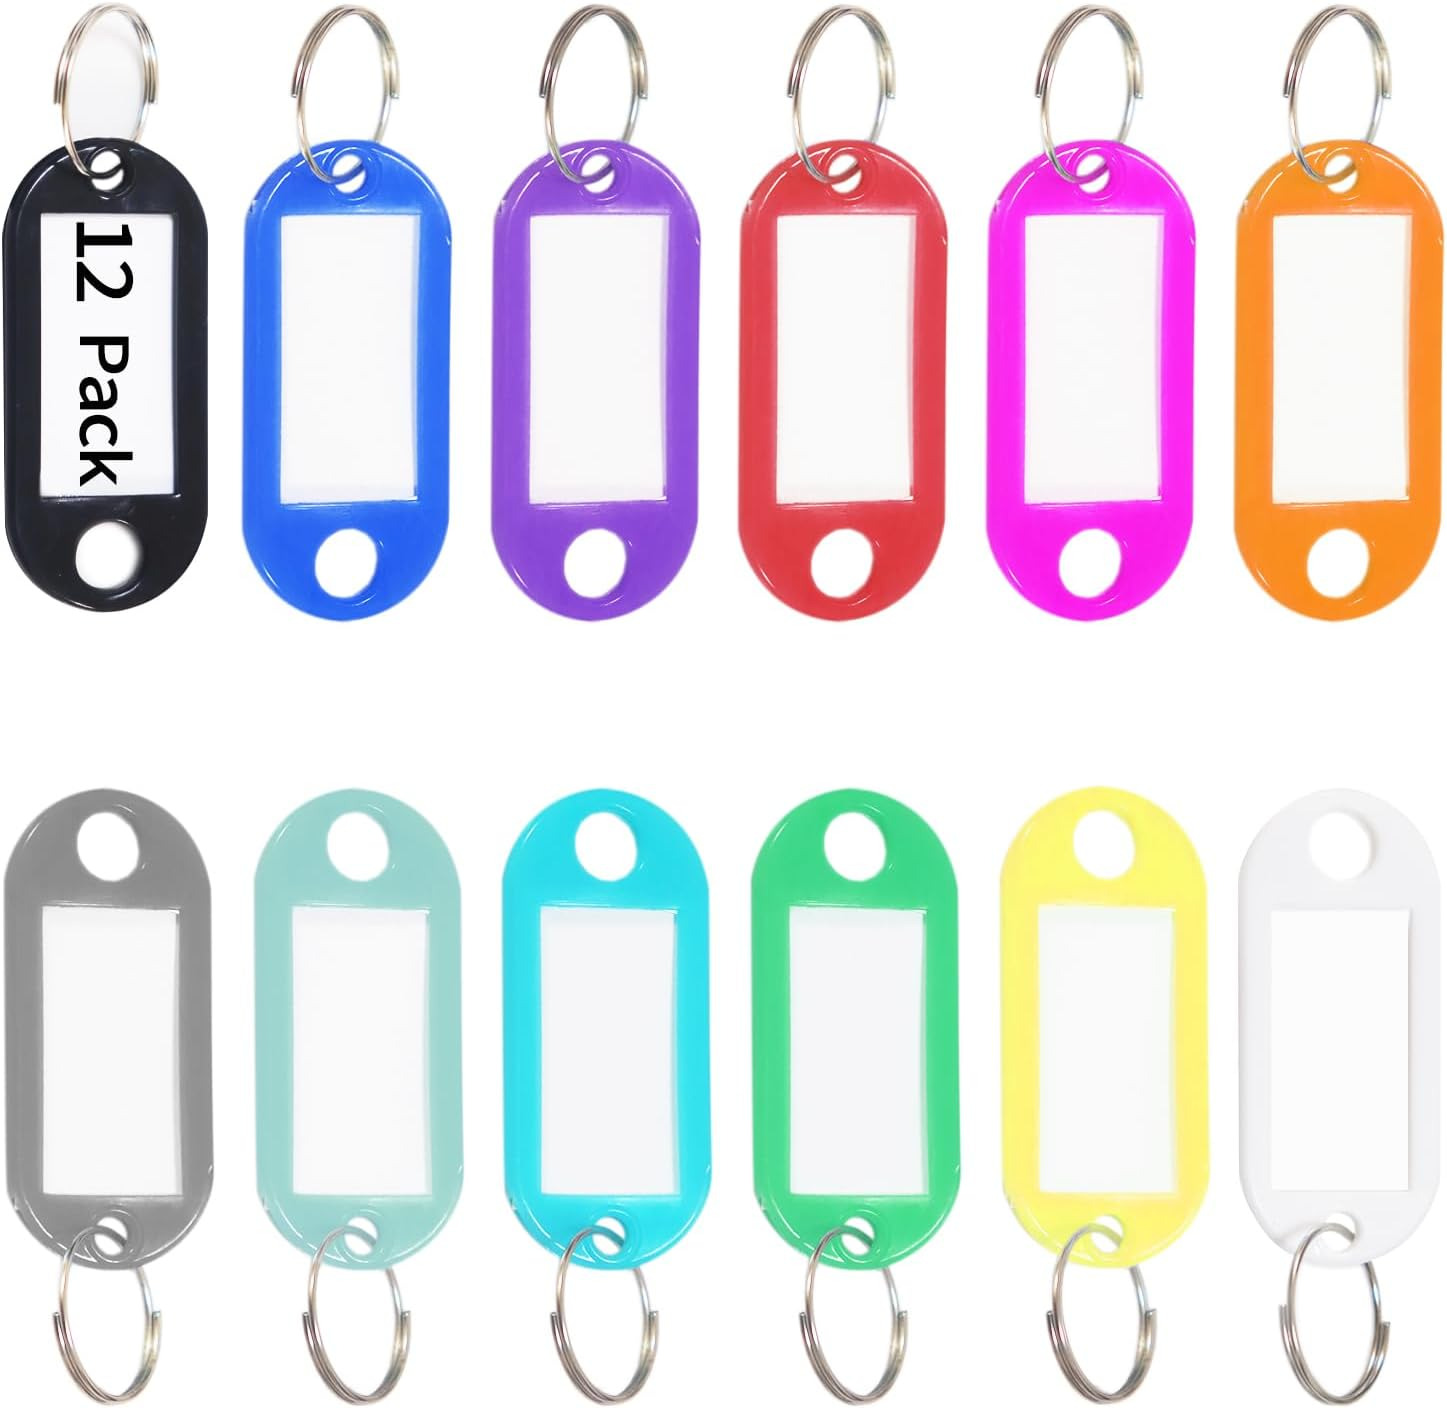 Key Tags Labels 12 Pack Plastic Ring Label Window Chain Name ID Identifiers Bags